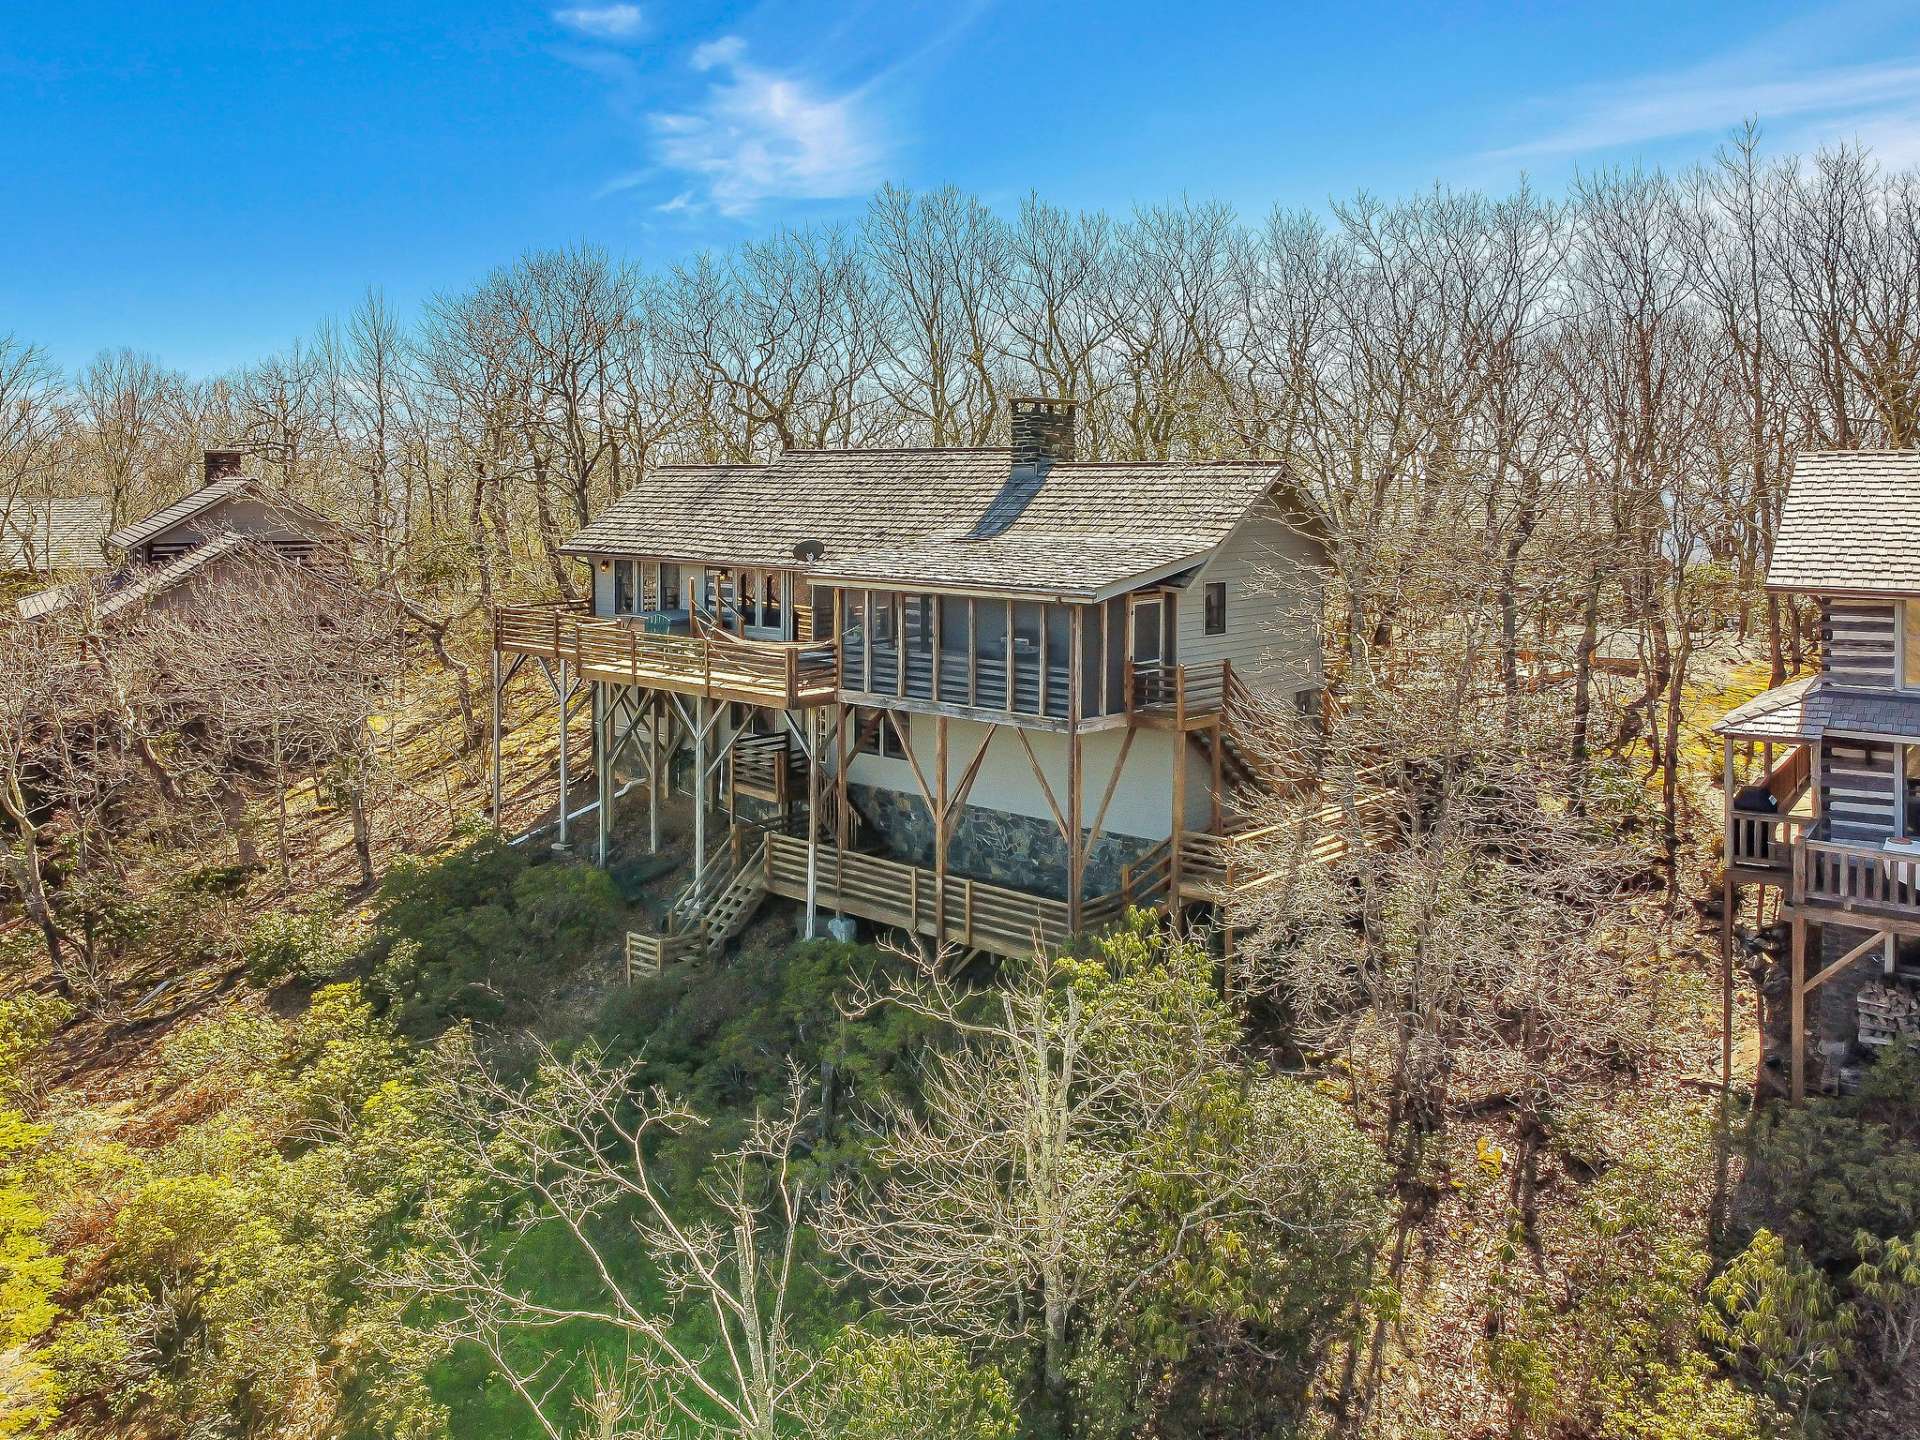 Welcome to your Blue Ridge Mountain log cabin nestled in a natural setting with views in the highly sought-after log cabin community of Stonebridge in the Southern Ashe County area of the NC High Country.